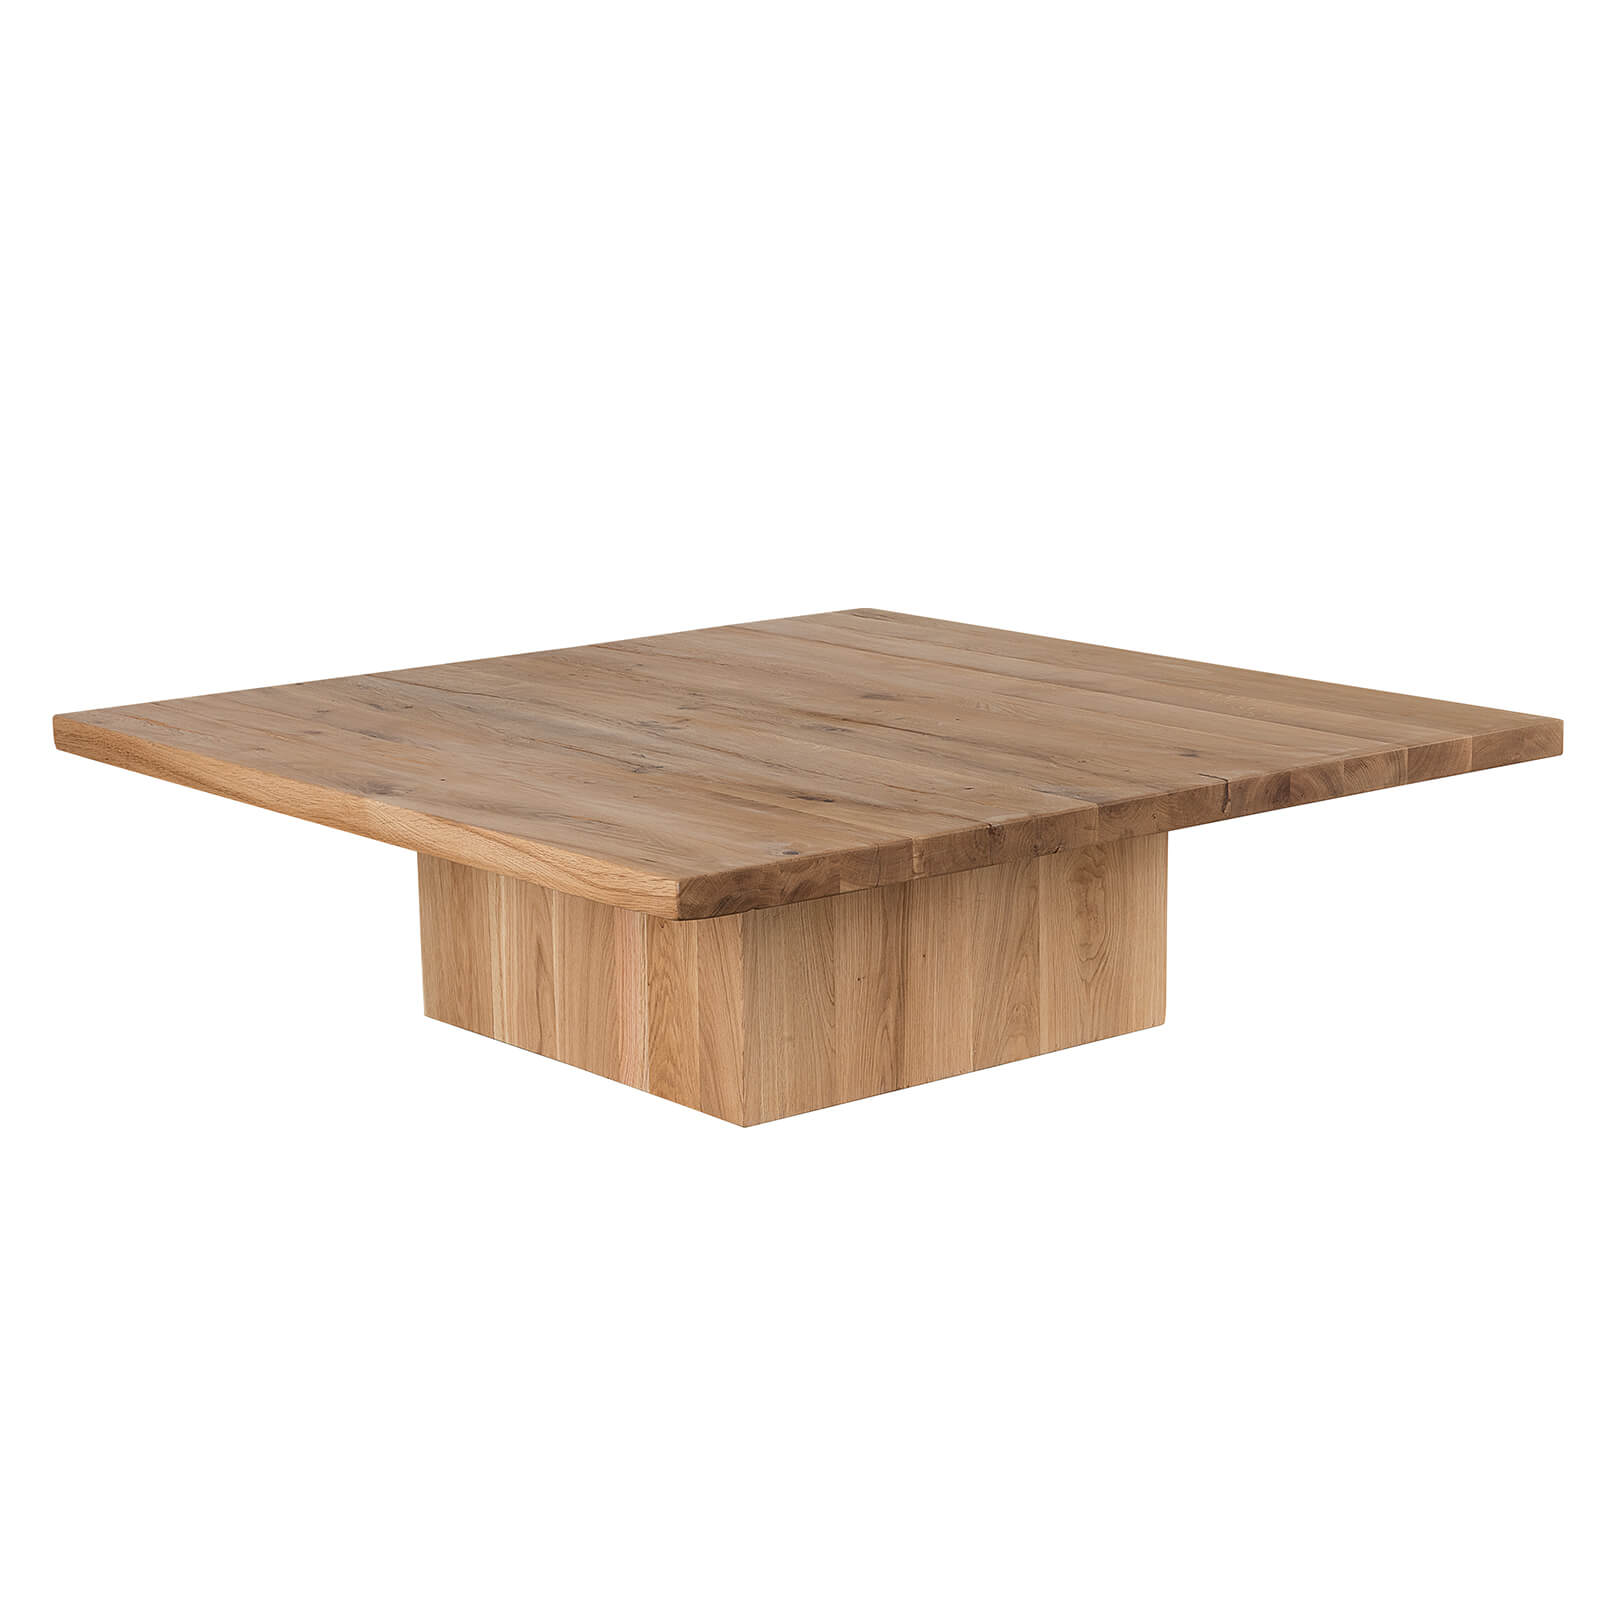 All We Need Coffee Table Square, Large, Toast - Image 5